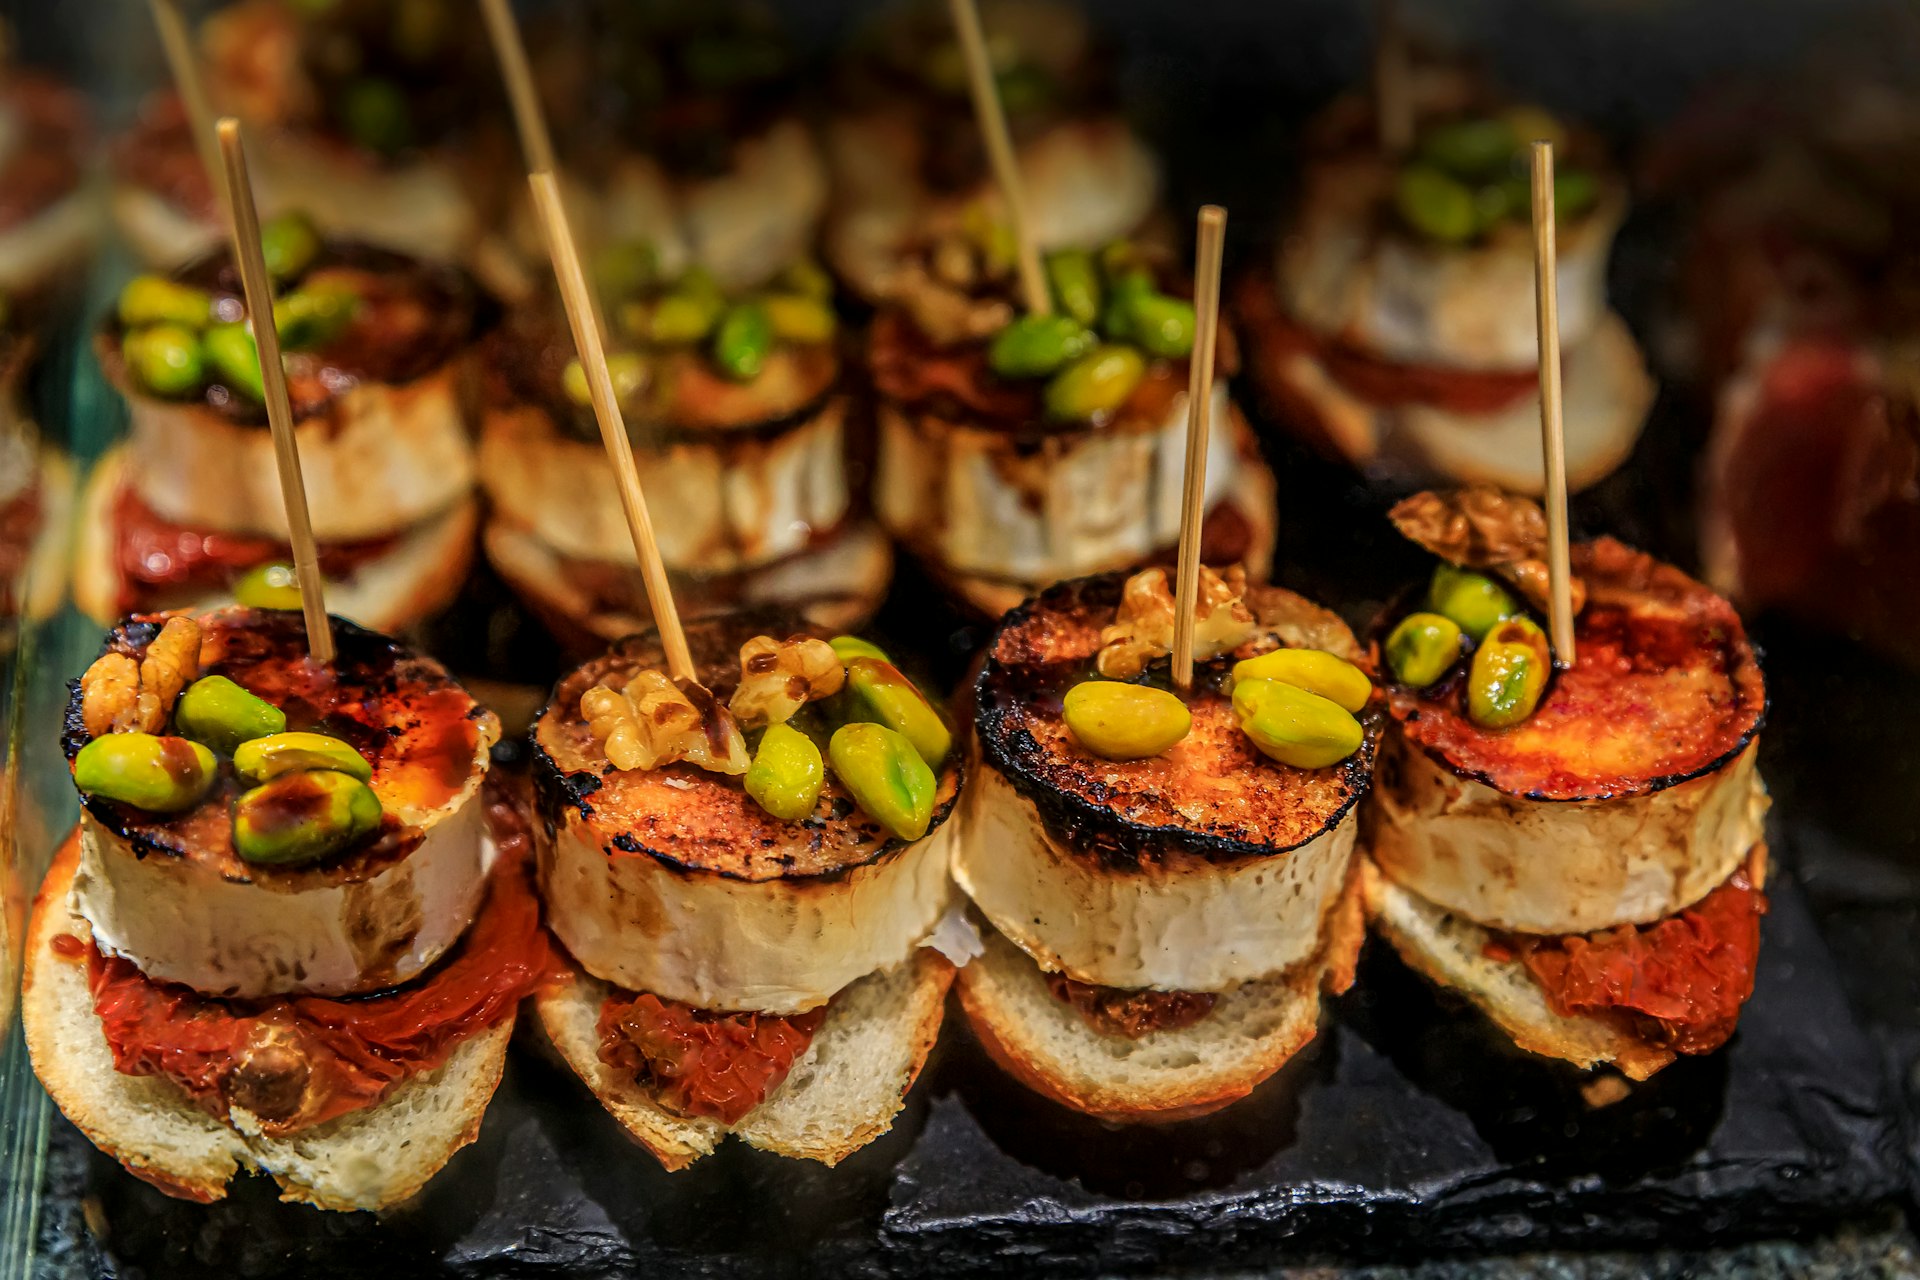 Traditional Spanish pintxos with goat cheese, pistachios, walnuts and red piquillo pepper at a bar in San Sebastian Donostia, Basque Country, Spain